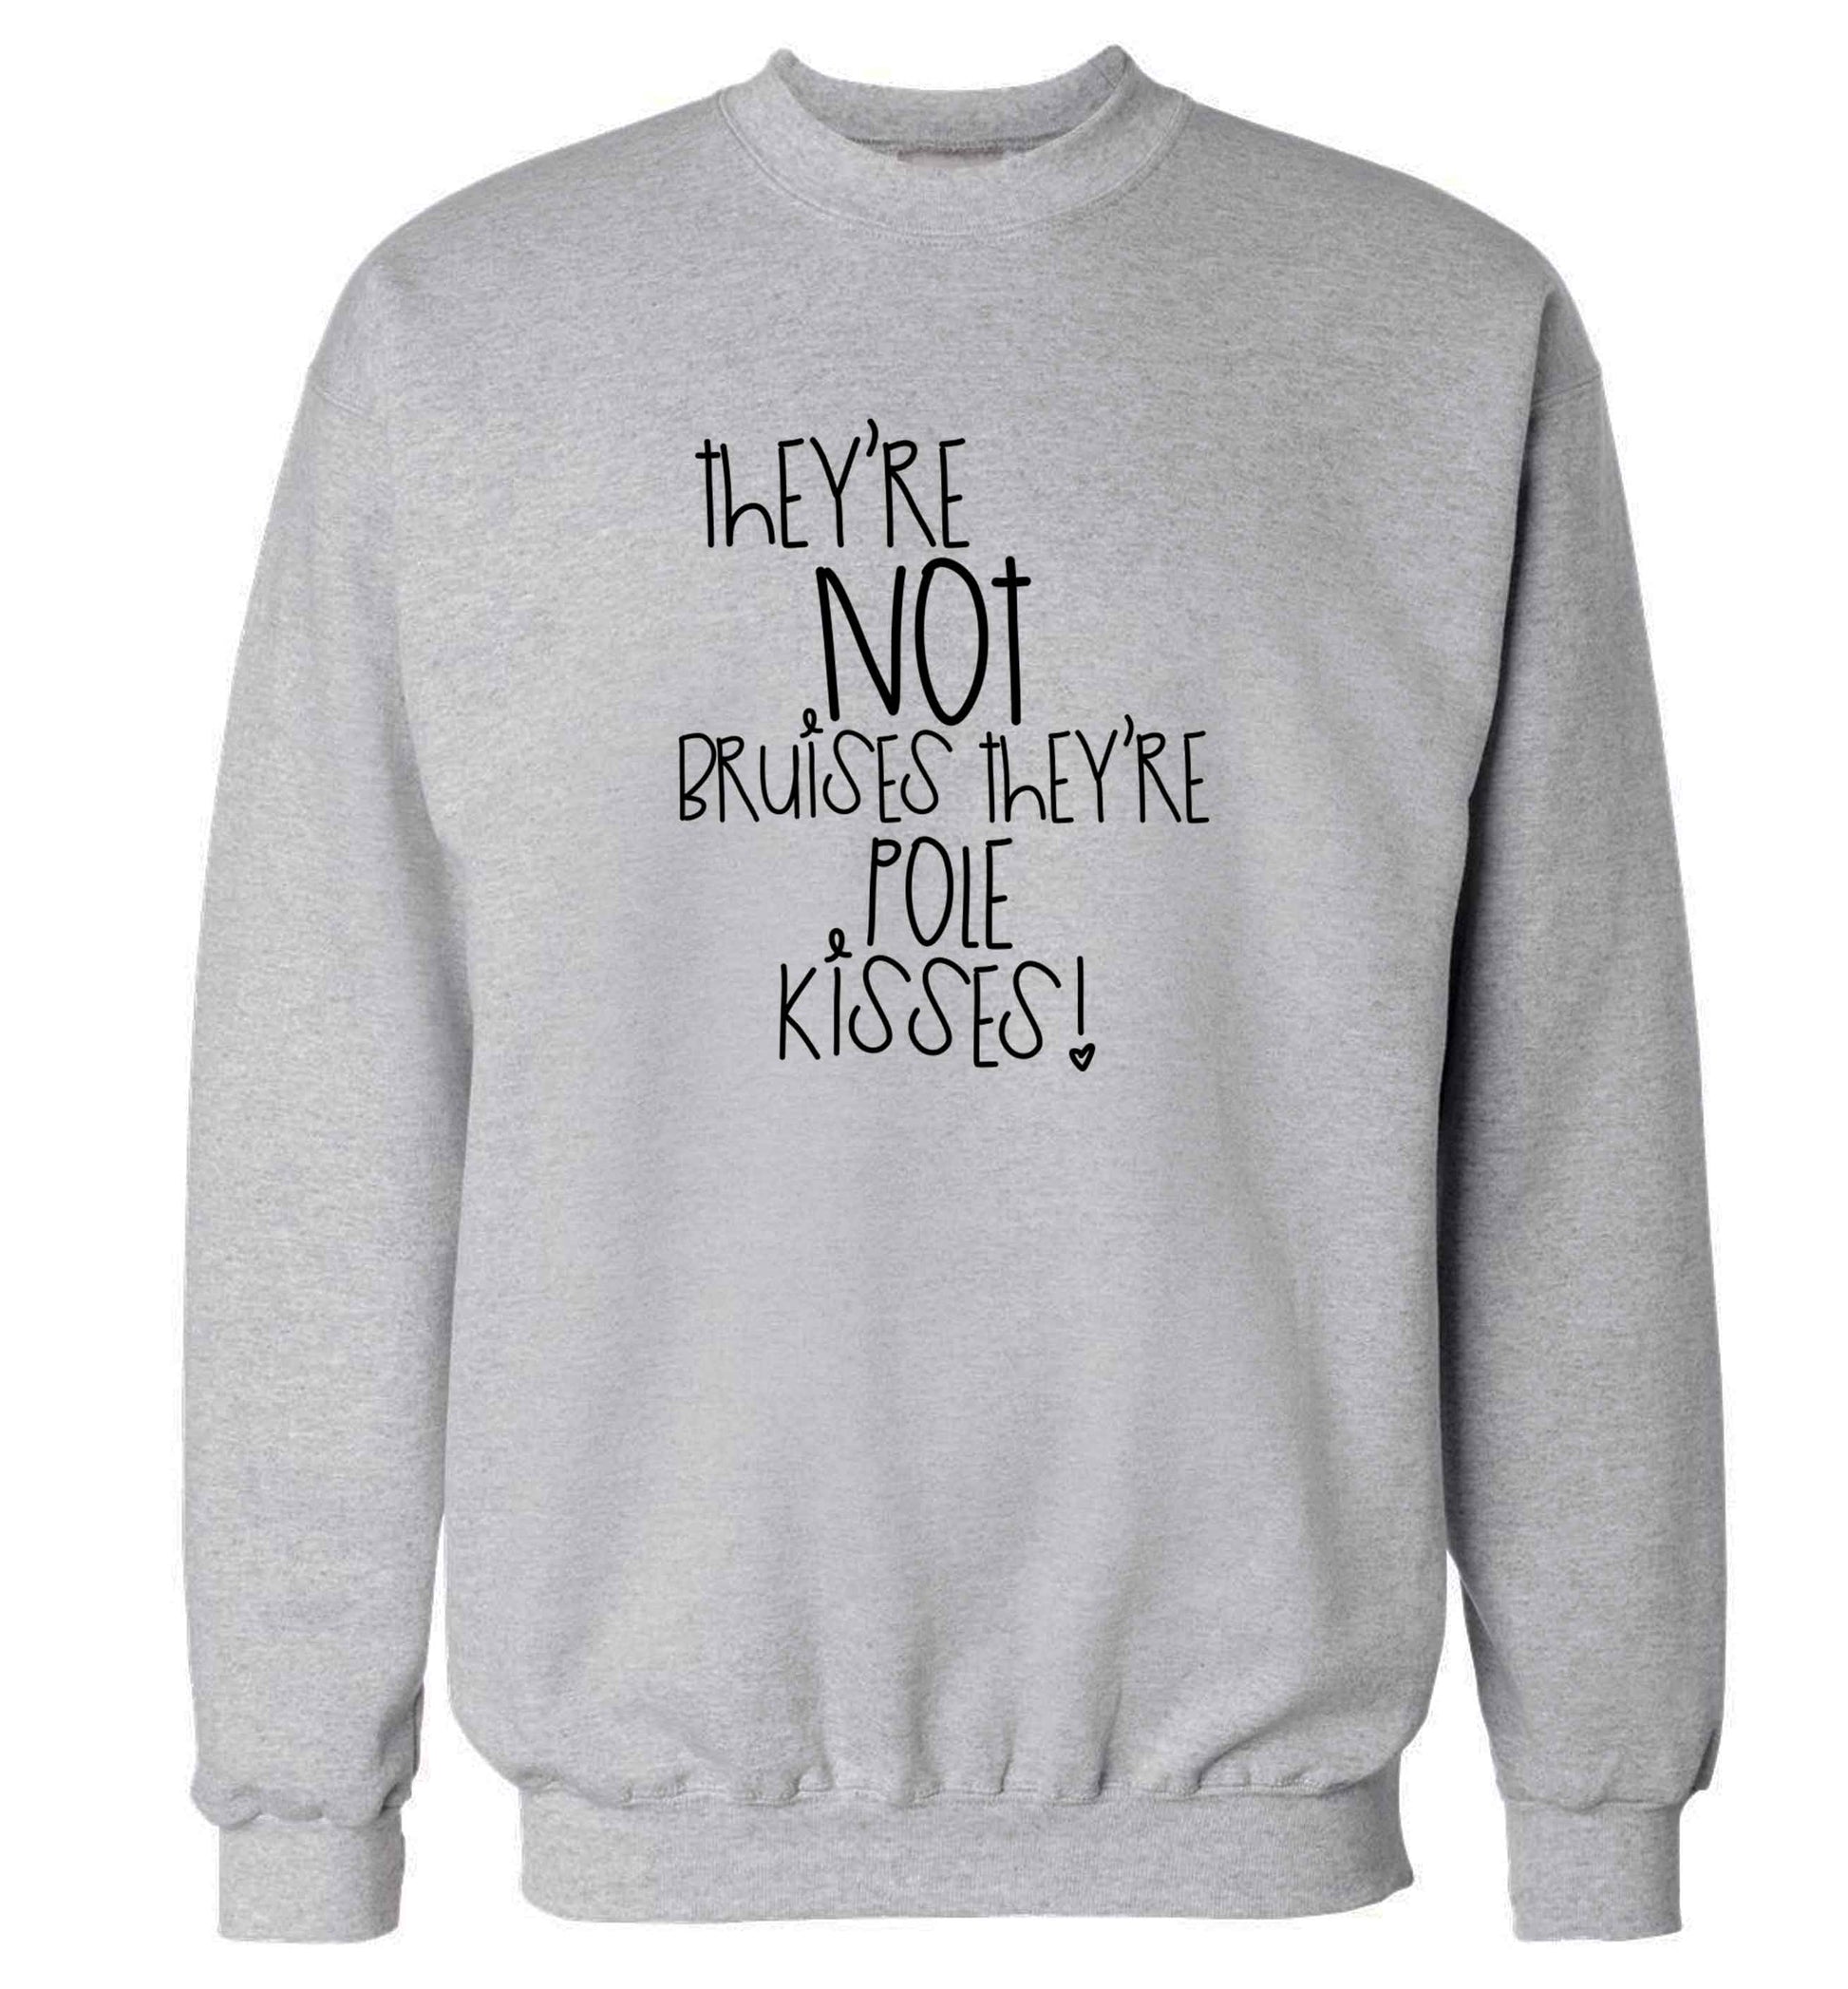 They're not bruises they're pole kisses adult's unisex grey sweater 2XL